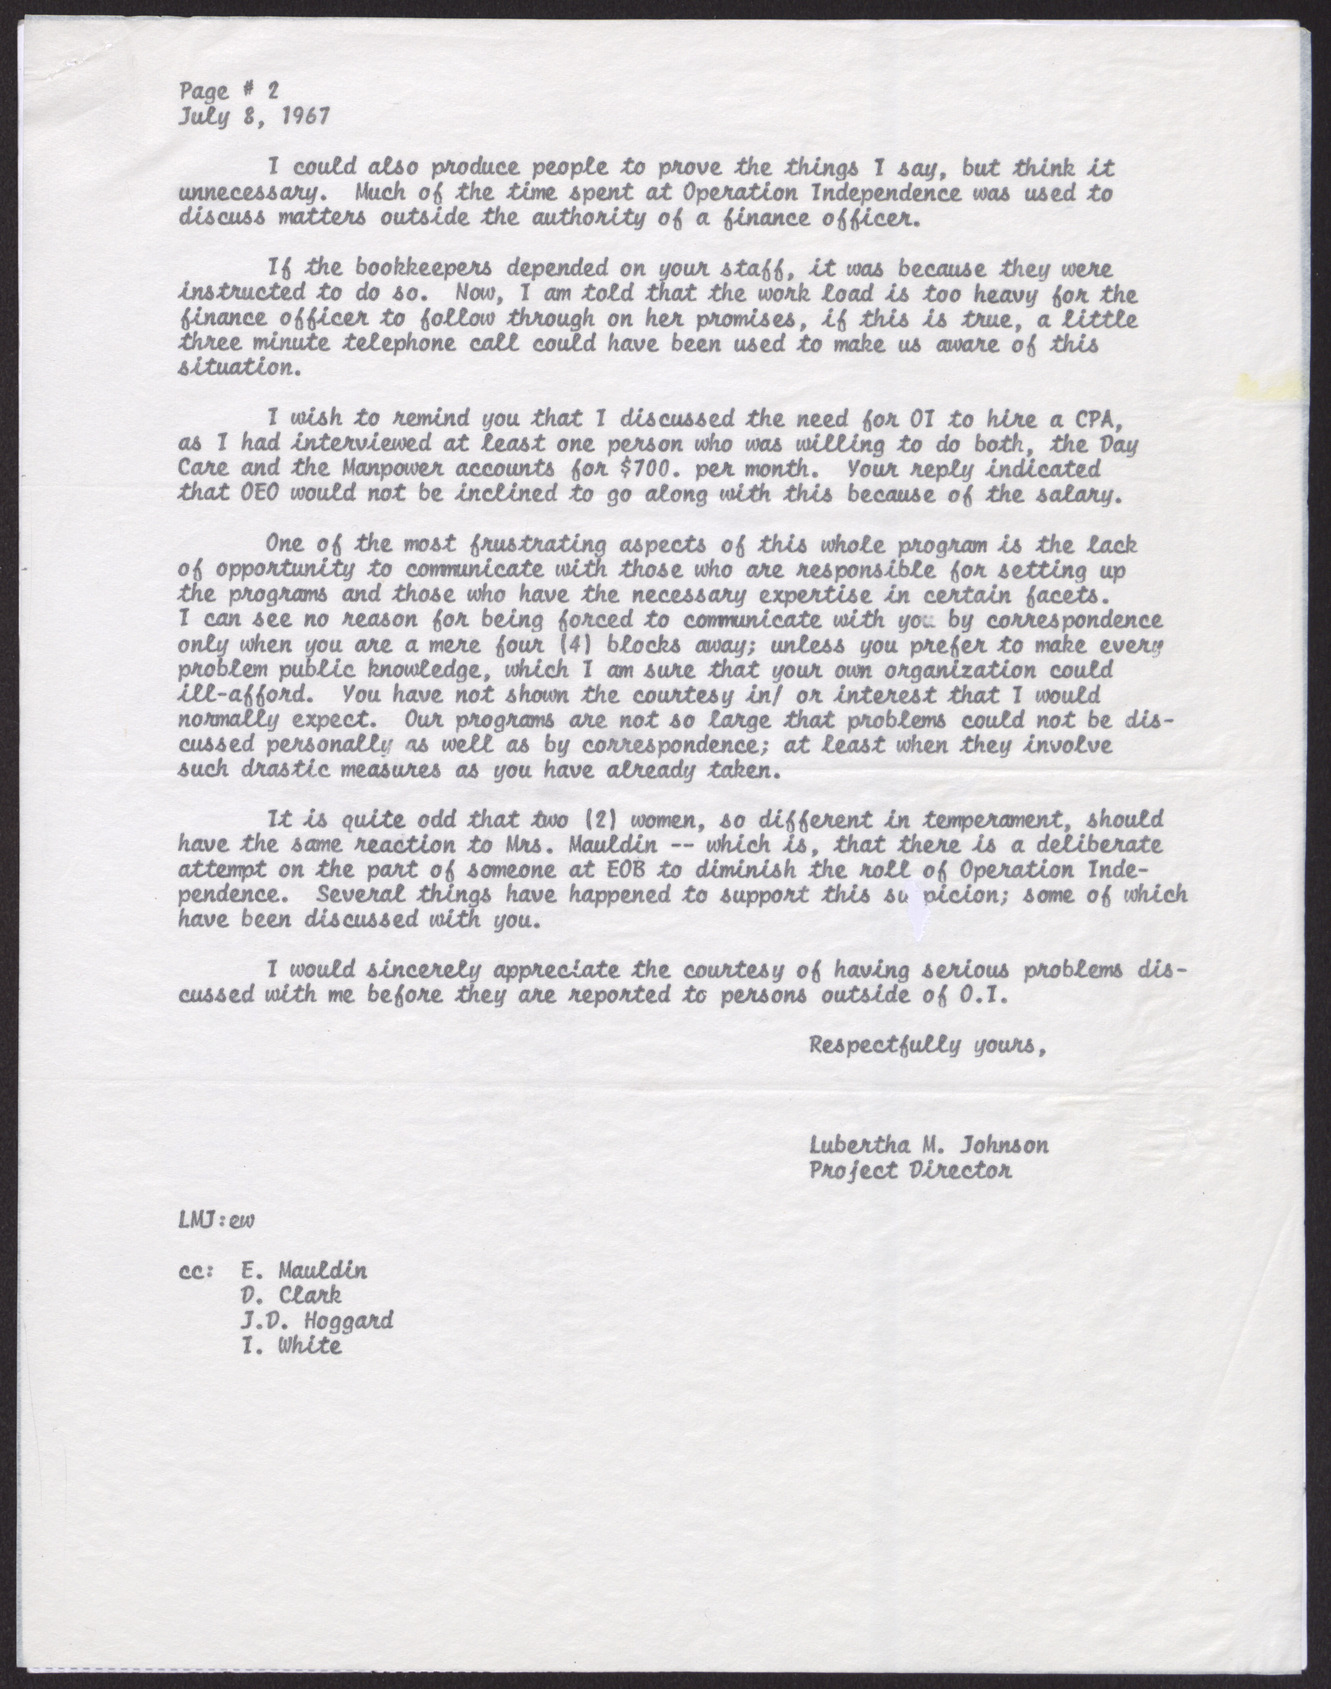 Letter to Mr. William Cottrell from Lubertha M. Johnson (2 pages), July 8, 1967, page 2